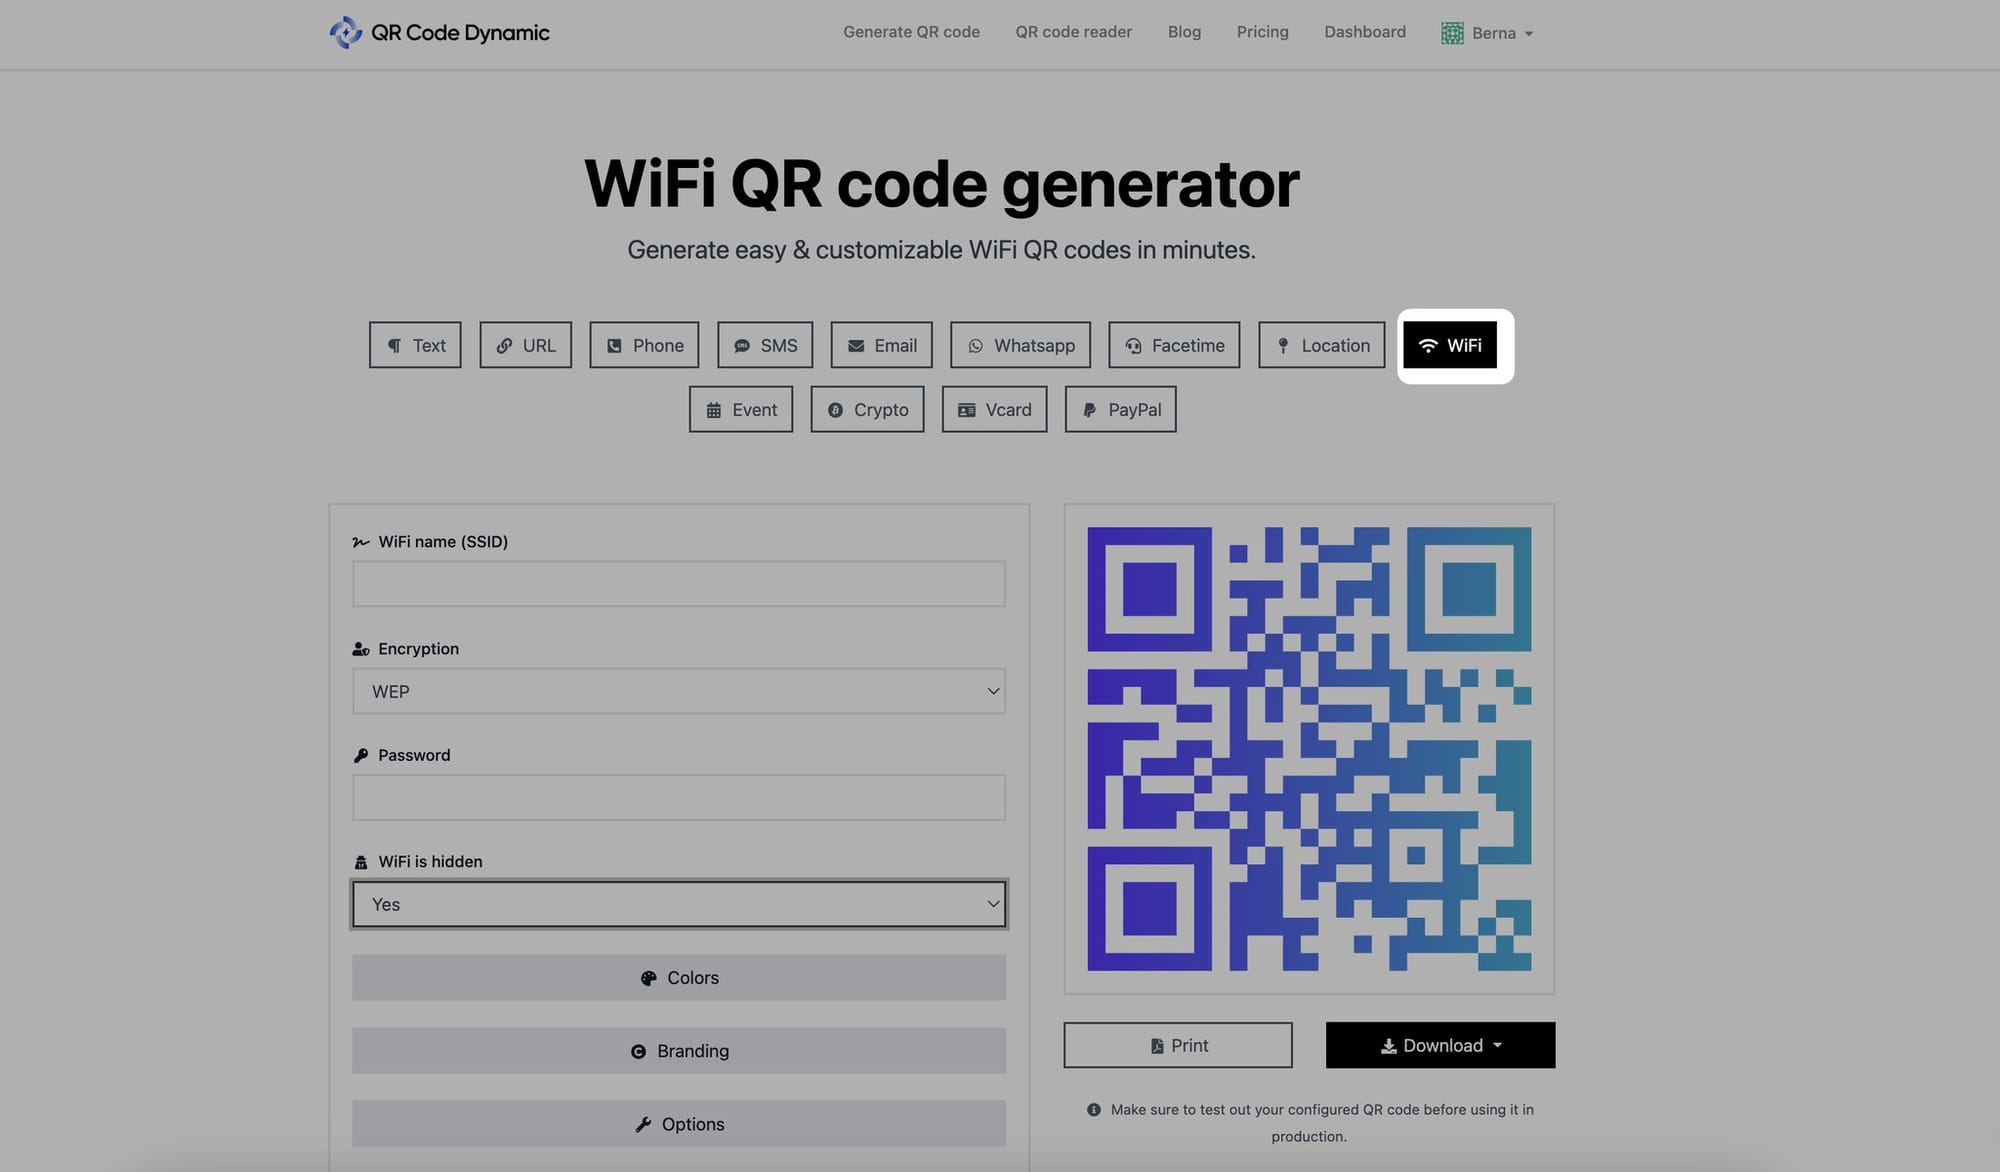 selecting wifi qr code type from the list